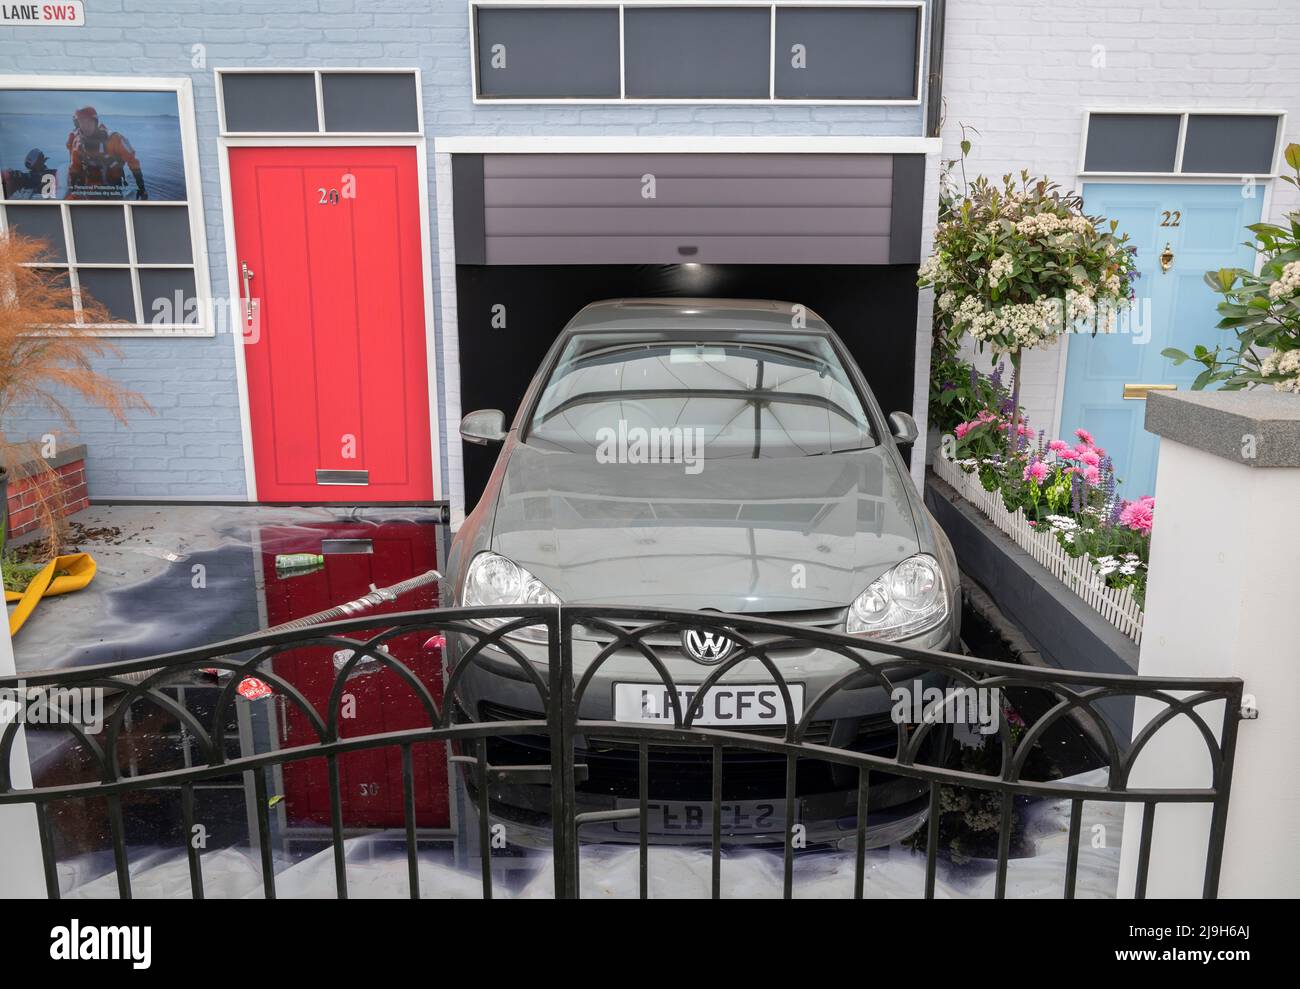 Royal Hospital, Chelsea, London, UK. 23 May 2022. The RHS Chelsea Flower show opens to the press. London Fire Brigade exhibit illustrates the consequences of having a paved driveway with a flooded car. Credit: Malcolm Park/Alamy Live News Stock Photo